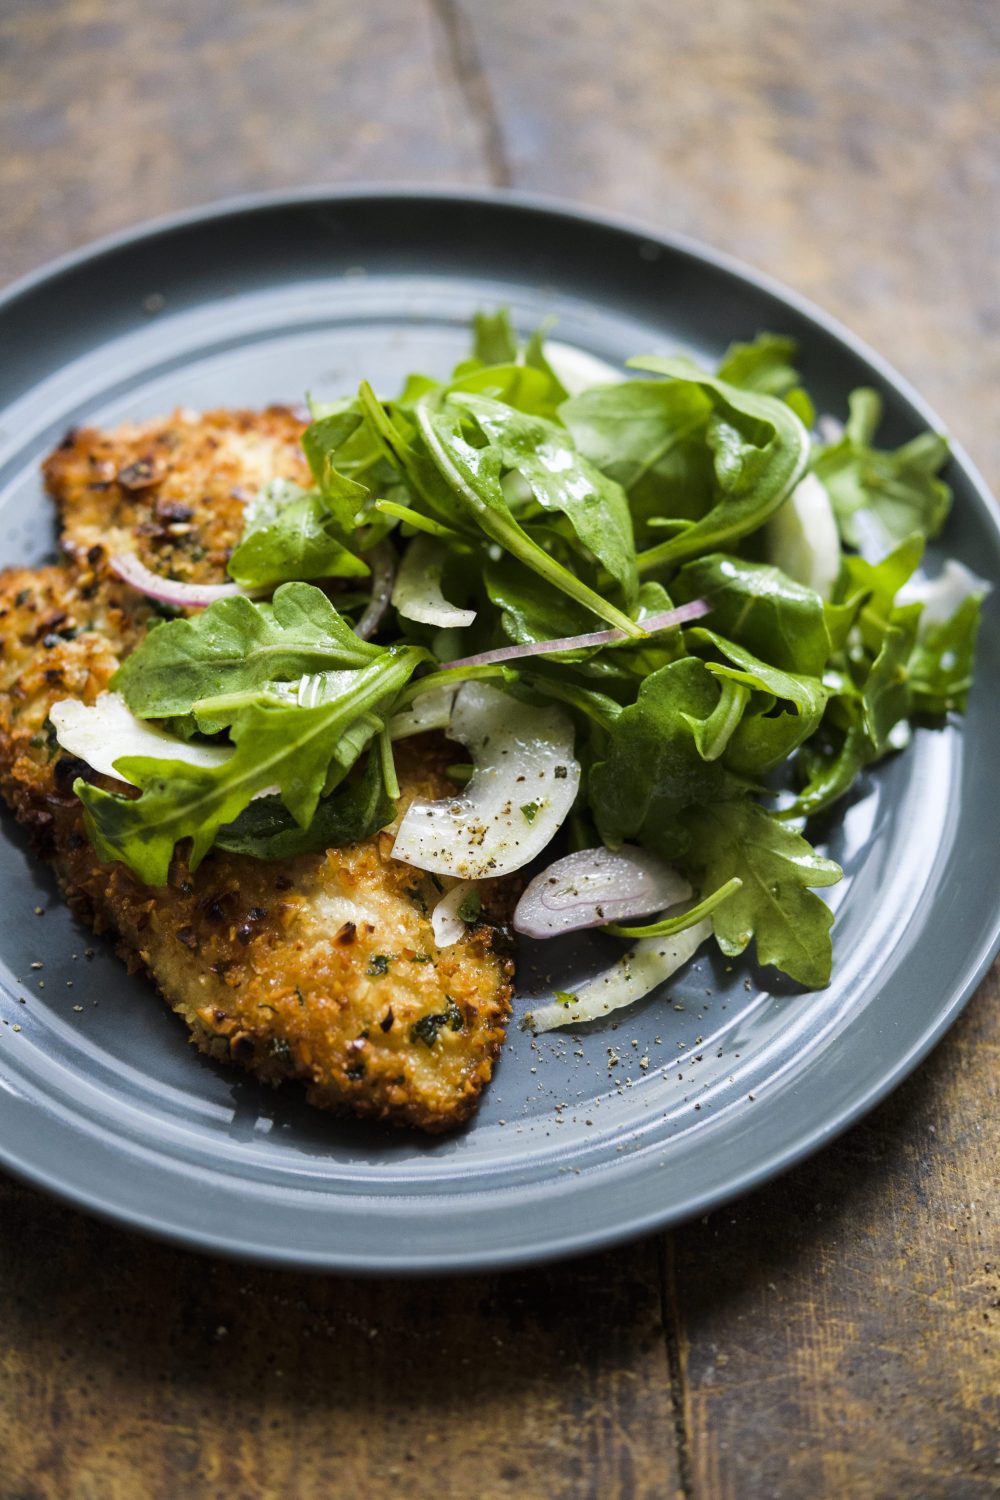 Hazelnut-Crusted Chicken Cutlets with Arugula and Fennel Salad